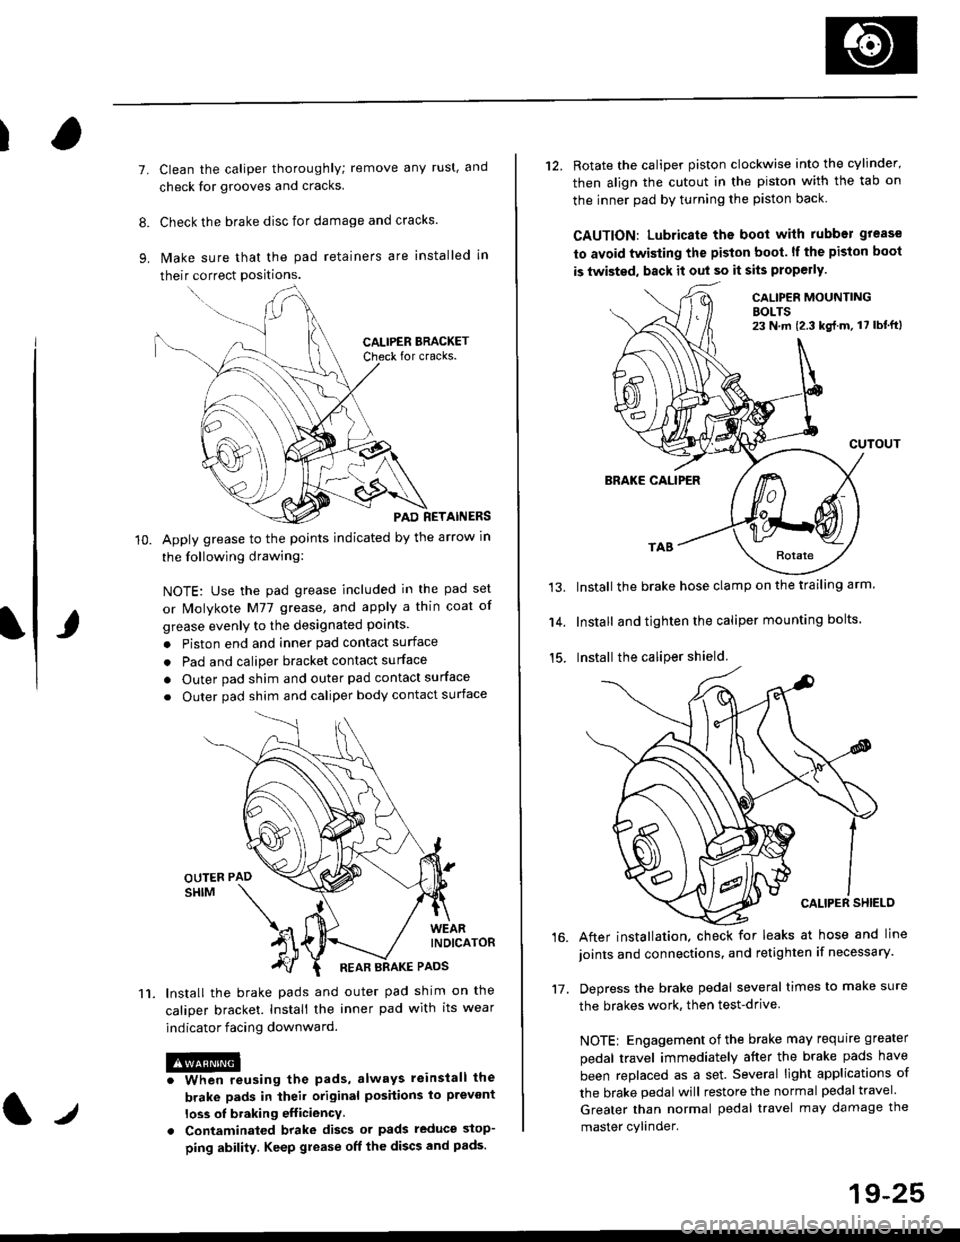 HONDA CIVIC 1997 6.G User Guide I
7.
11.
Clean the caliper thoroughly; remove any rust, and
check for grooves and cracks.
Check the brake disc for damage and cracks.
lvlake sure that the pad retainers are installed in
their correct 